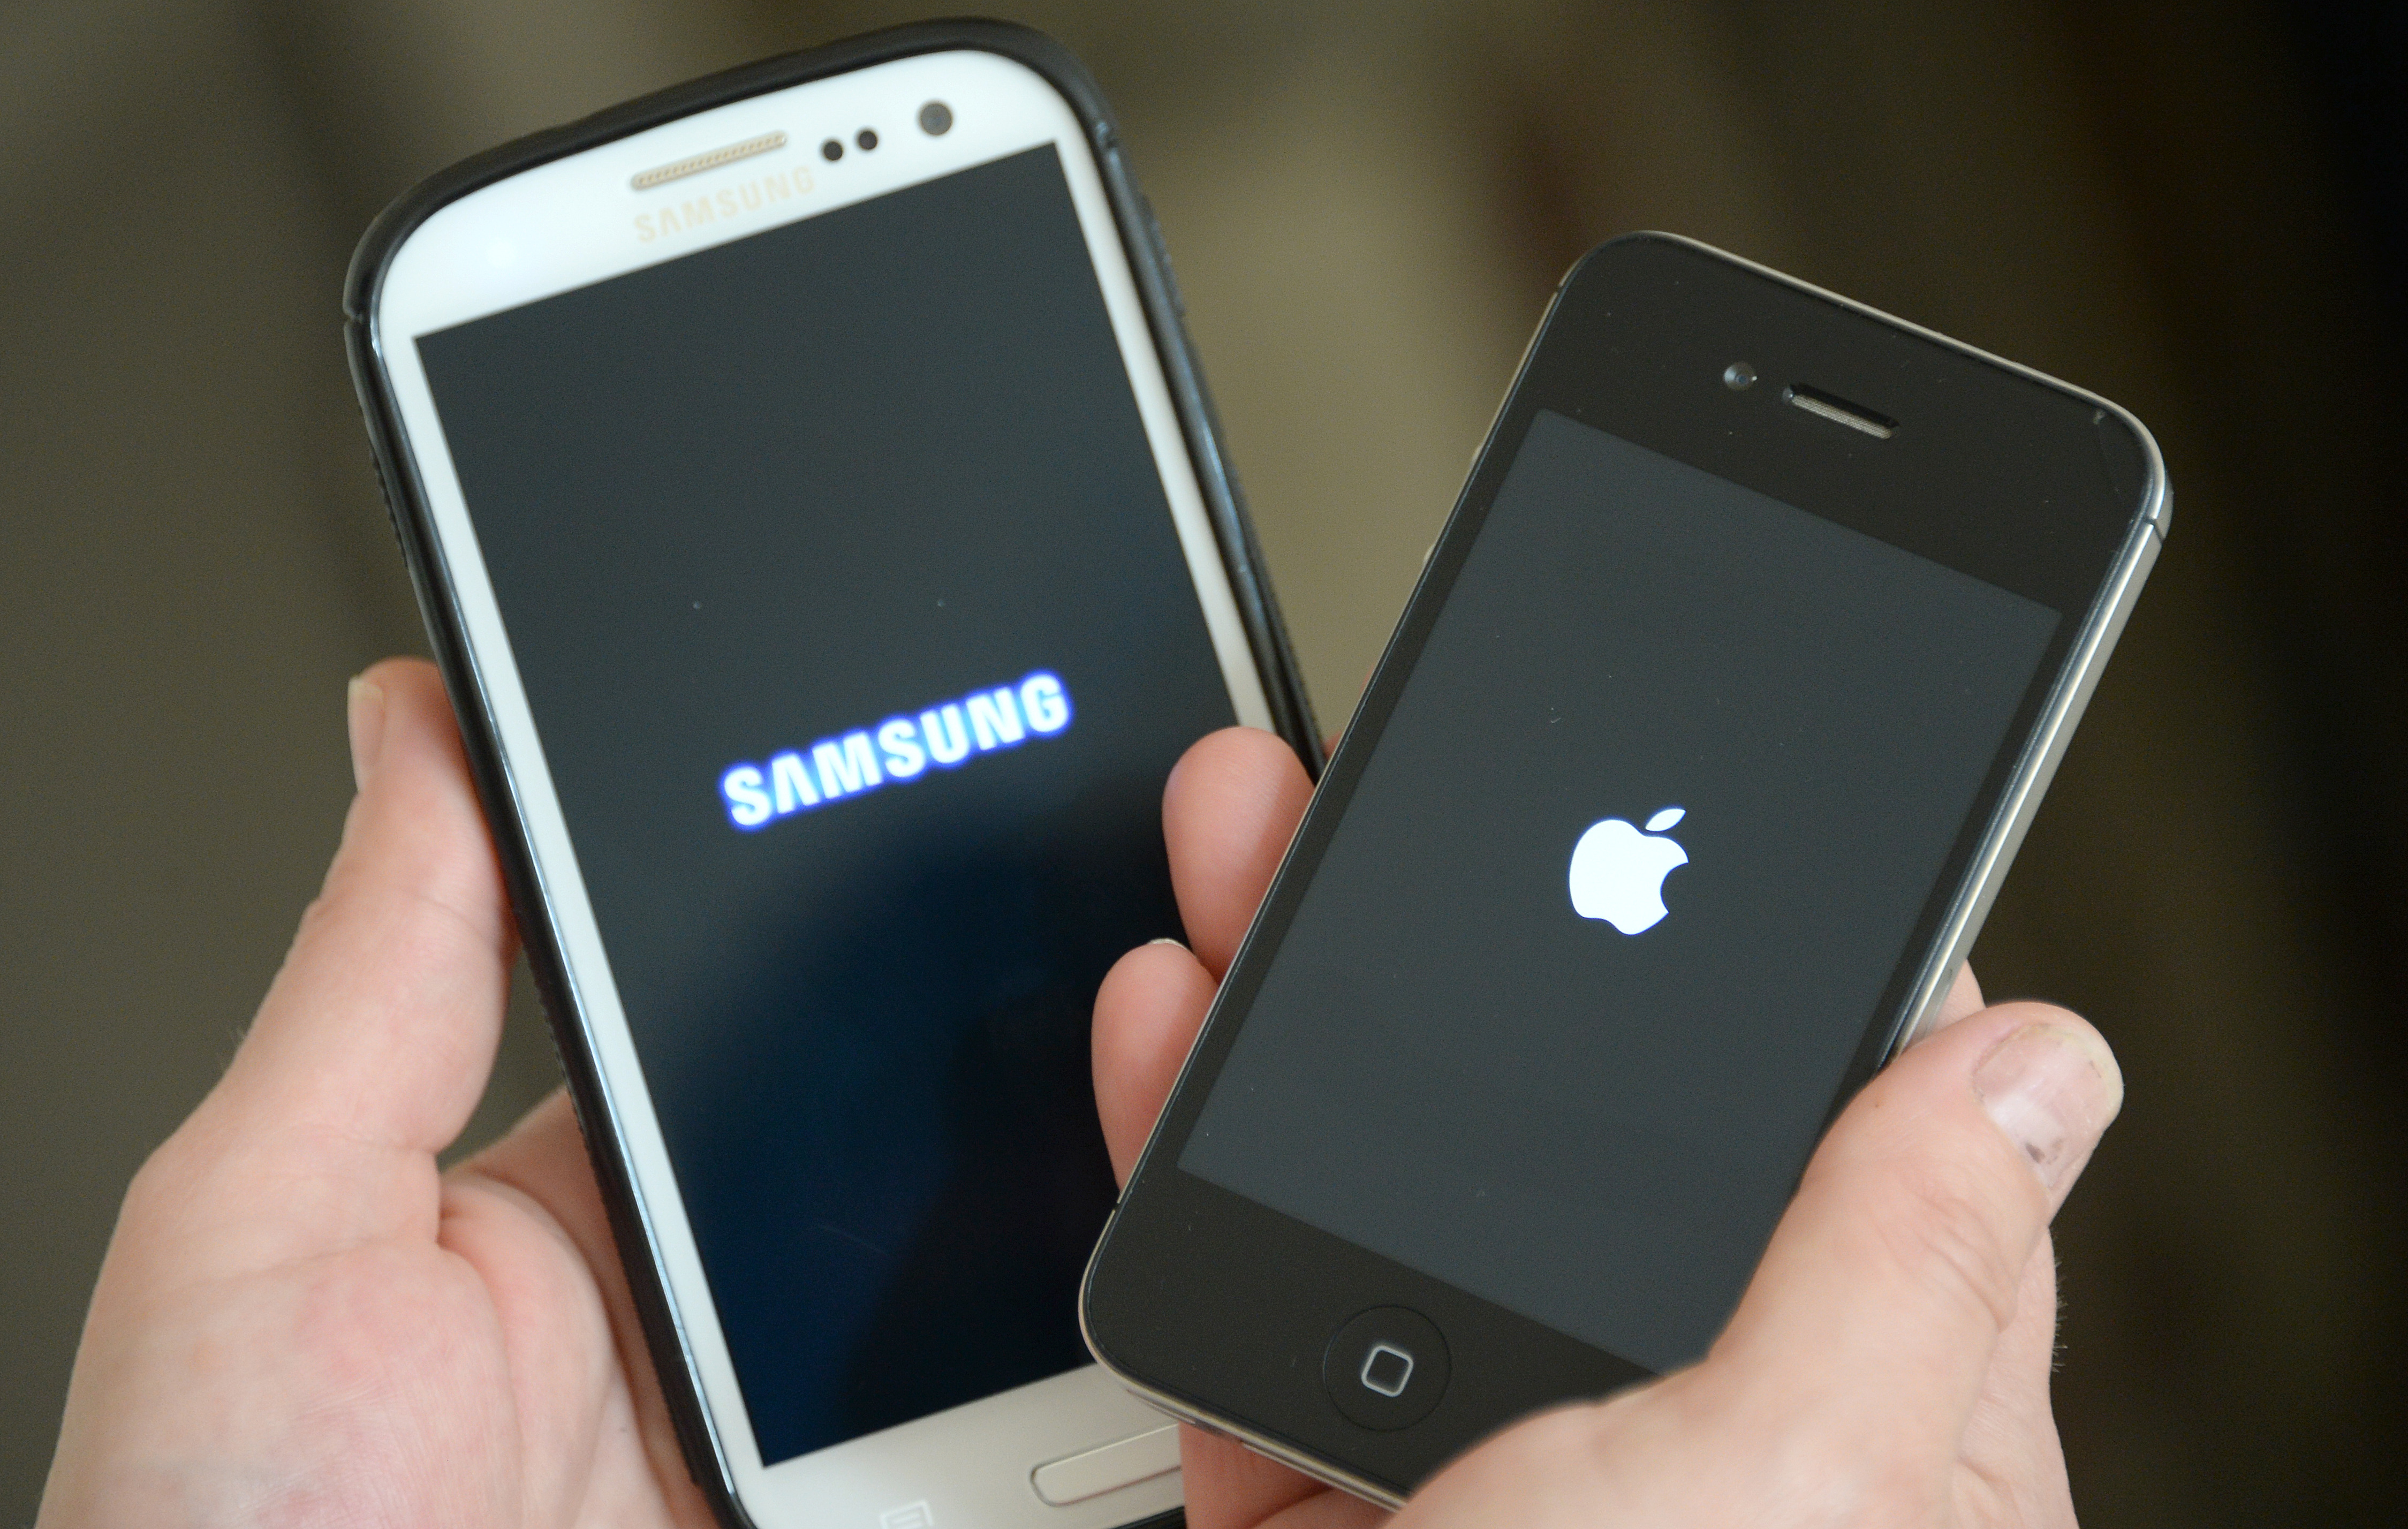 Patent dispute between Apple and Samsung continues